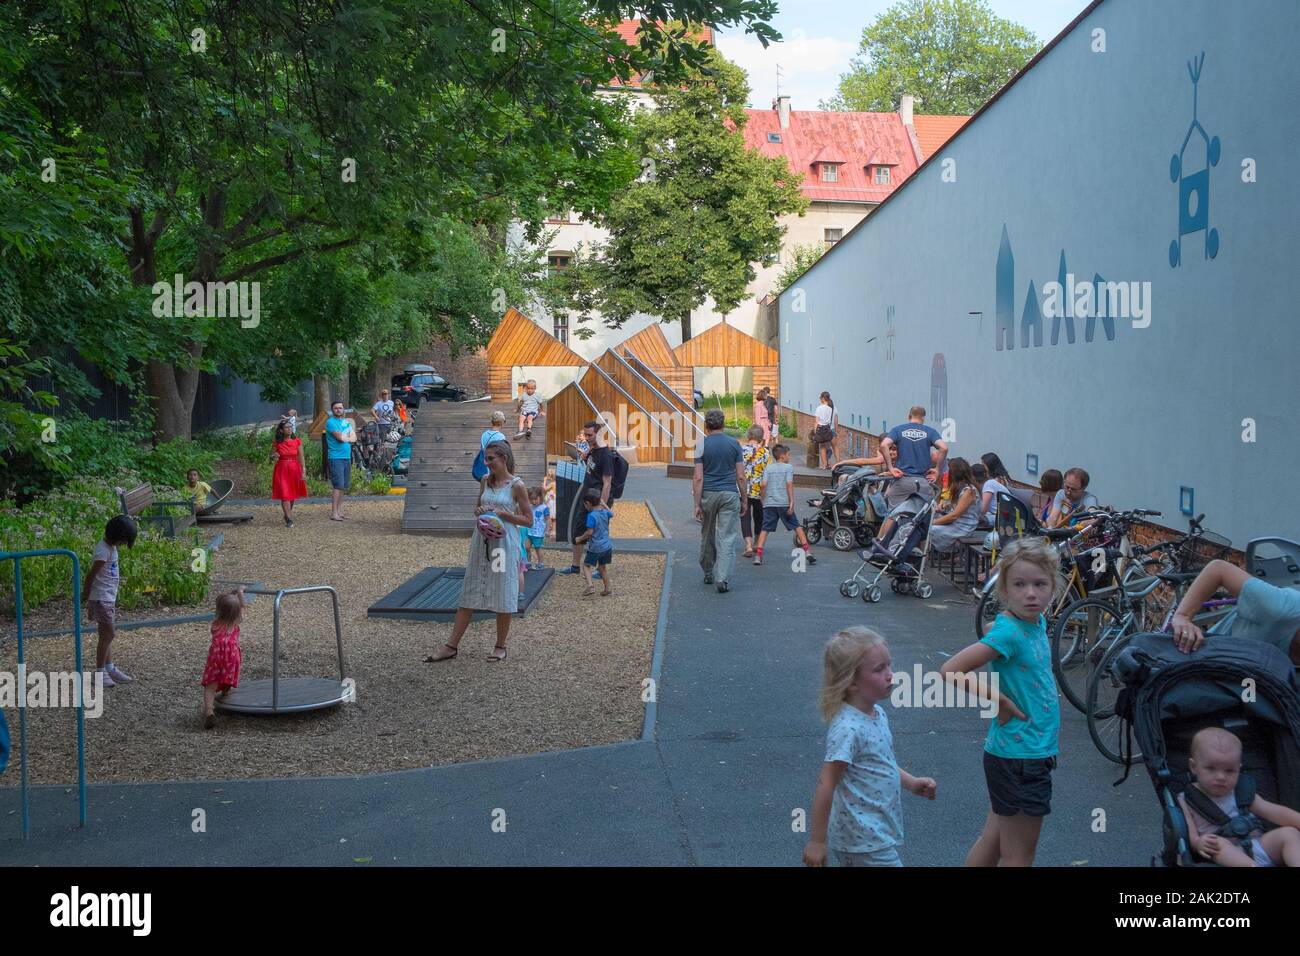 Children and parents at a playground in Kraków, Poland Stock Photo